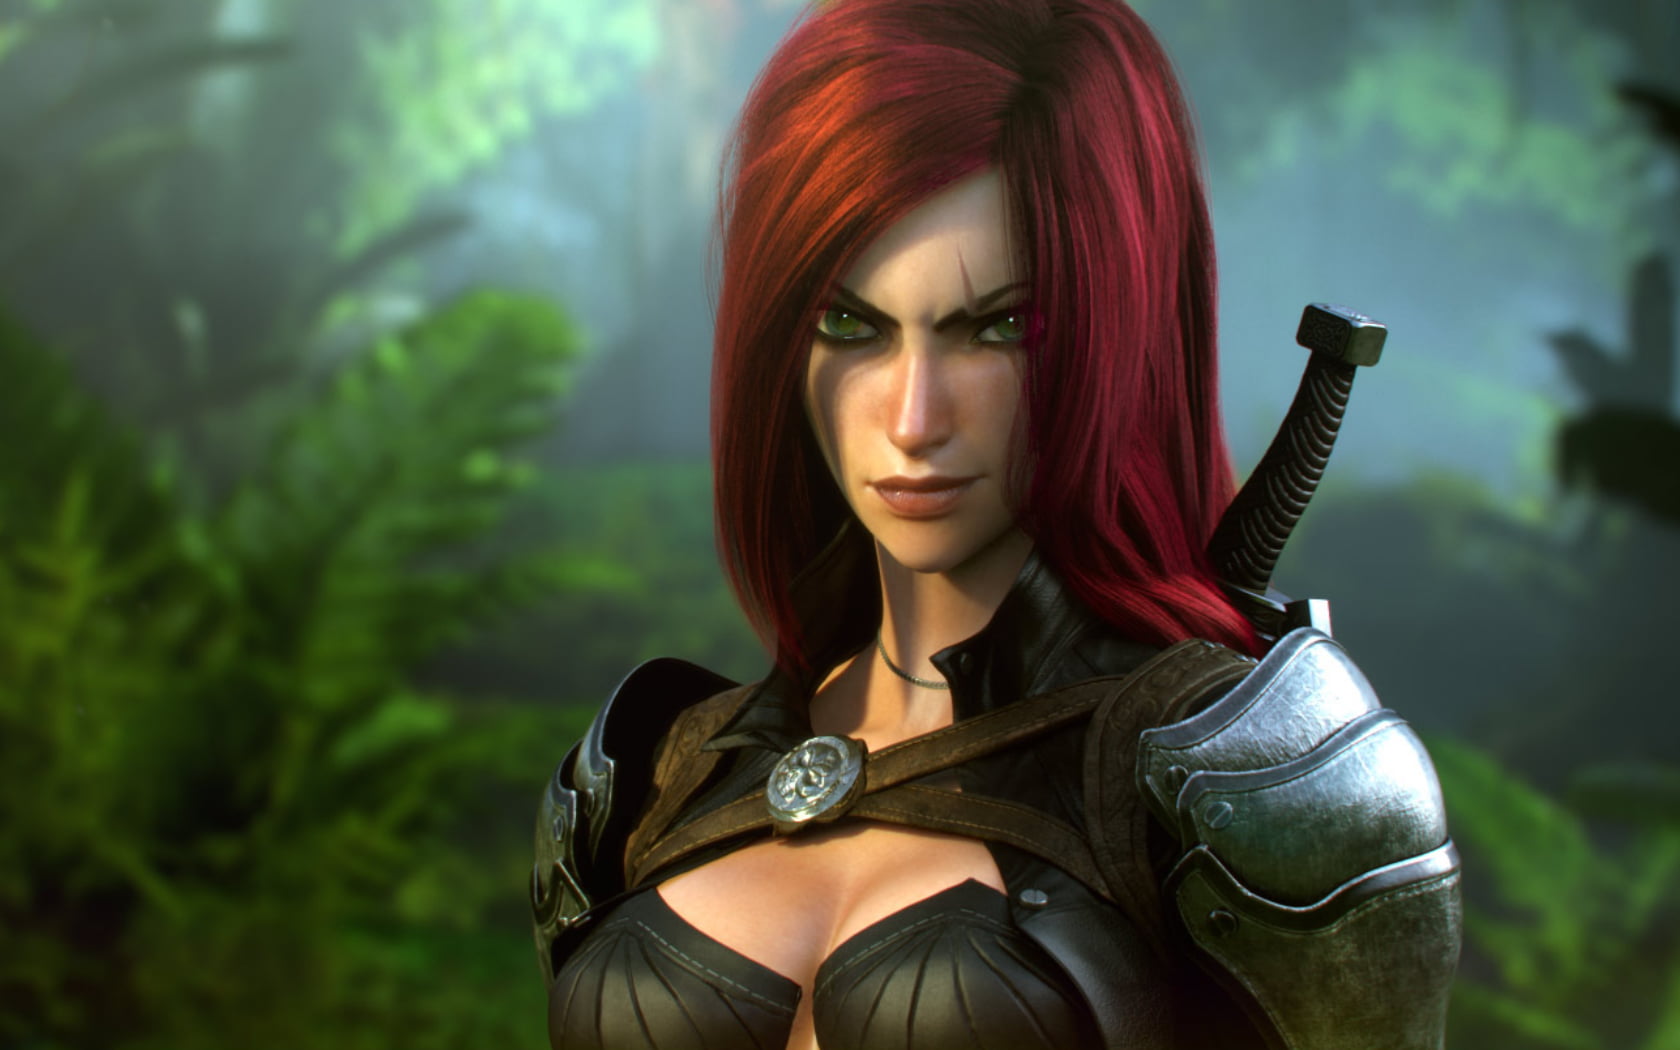 woman with sword wallpaper, League of Legends, video games, fantasy girl